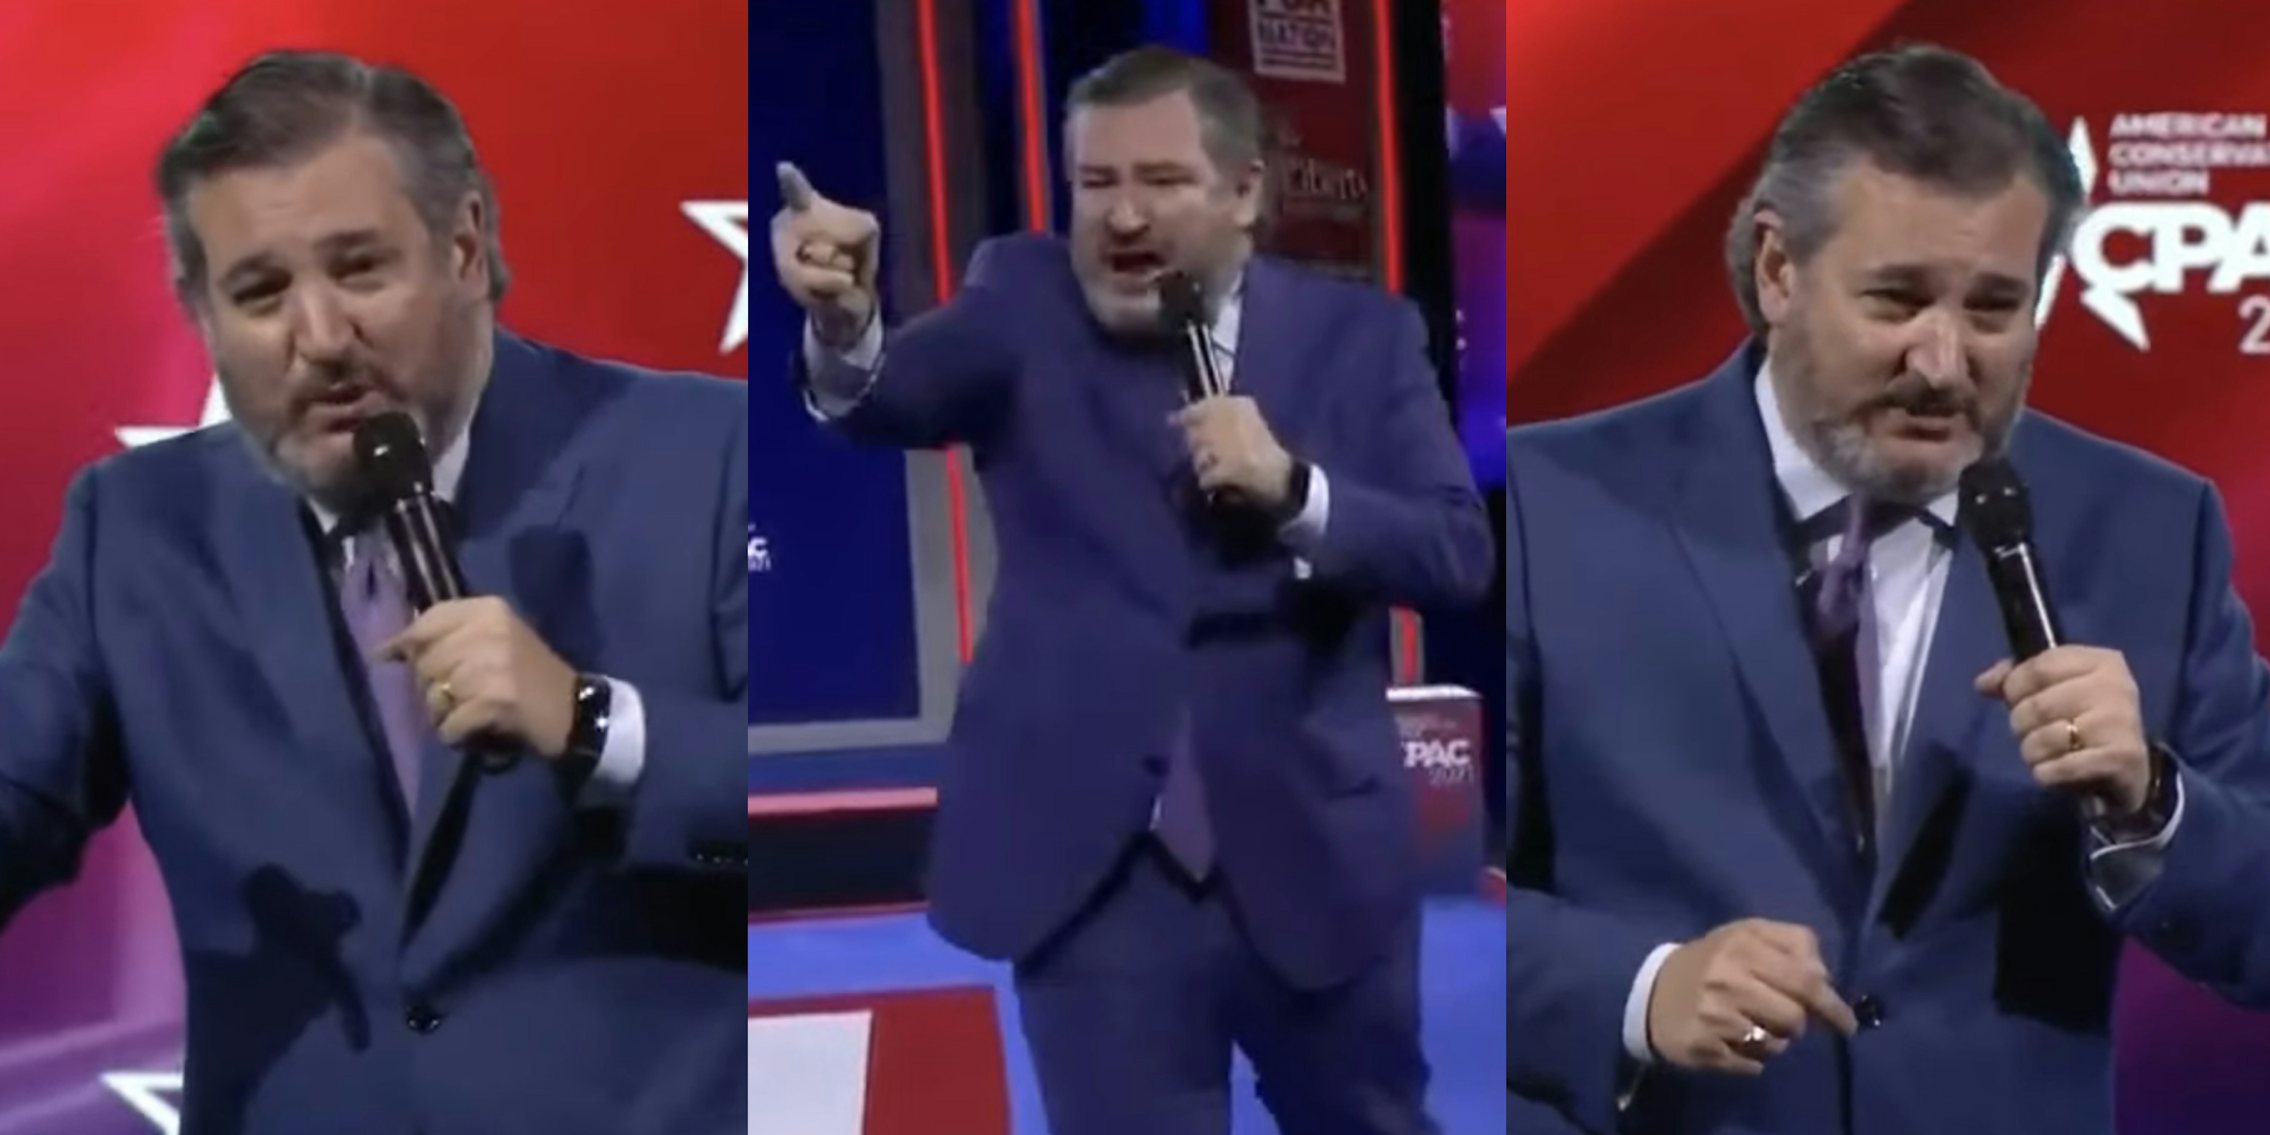 Ted Cruz screamed 'freedom' at the top of his lungs during a speech at CPAC.